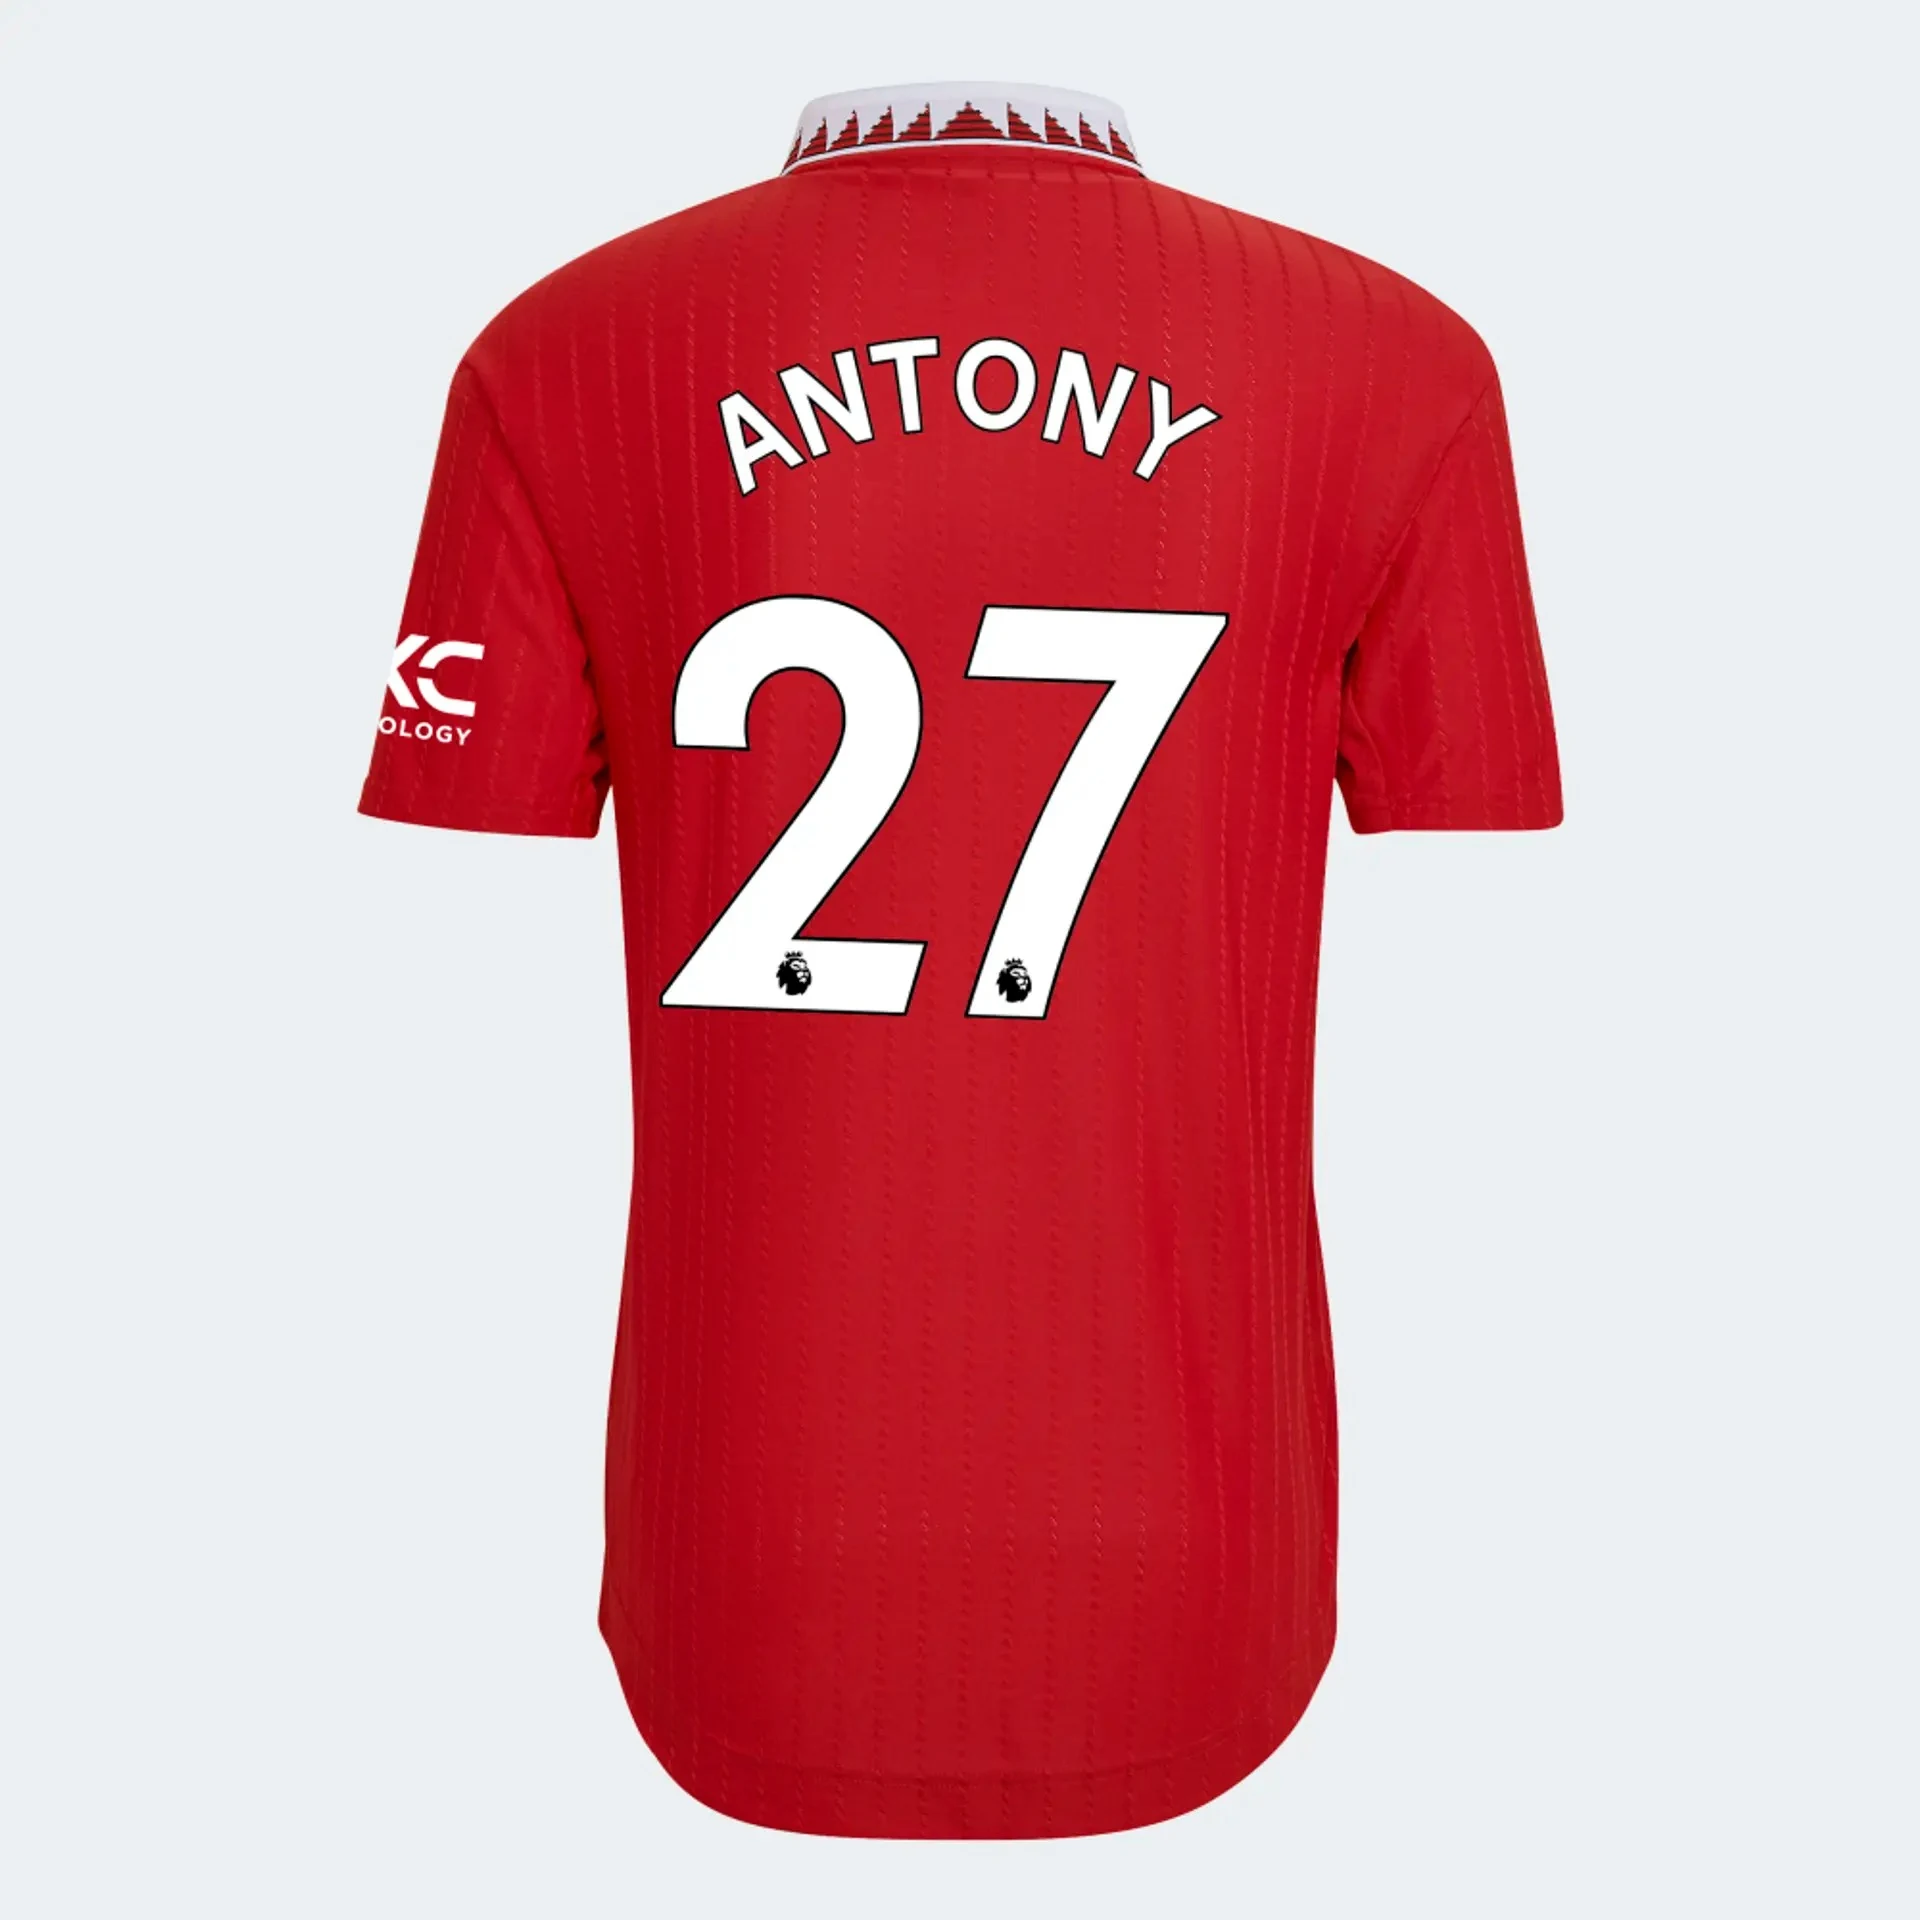 5 shirt numbers Man United can offer to Antony - in pictures